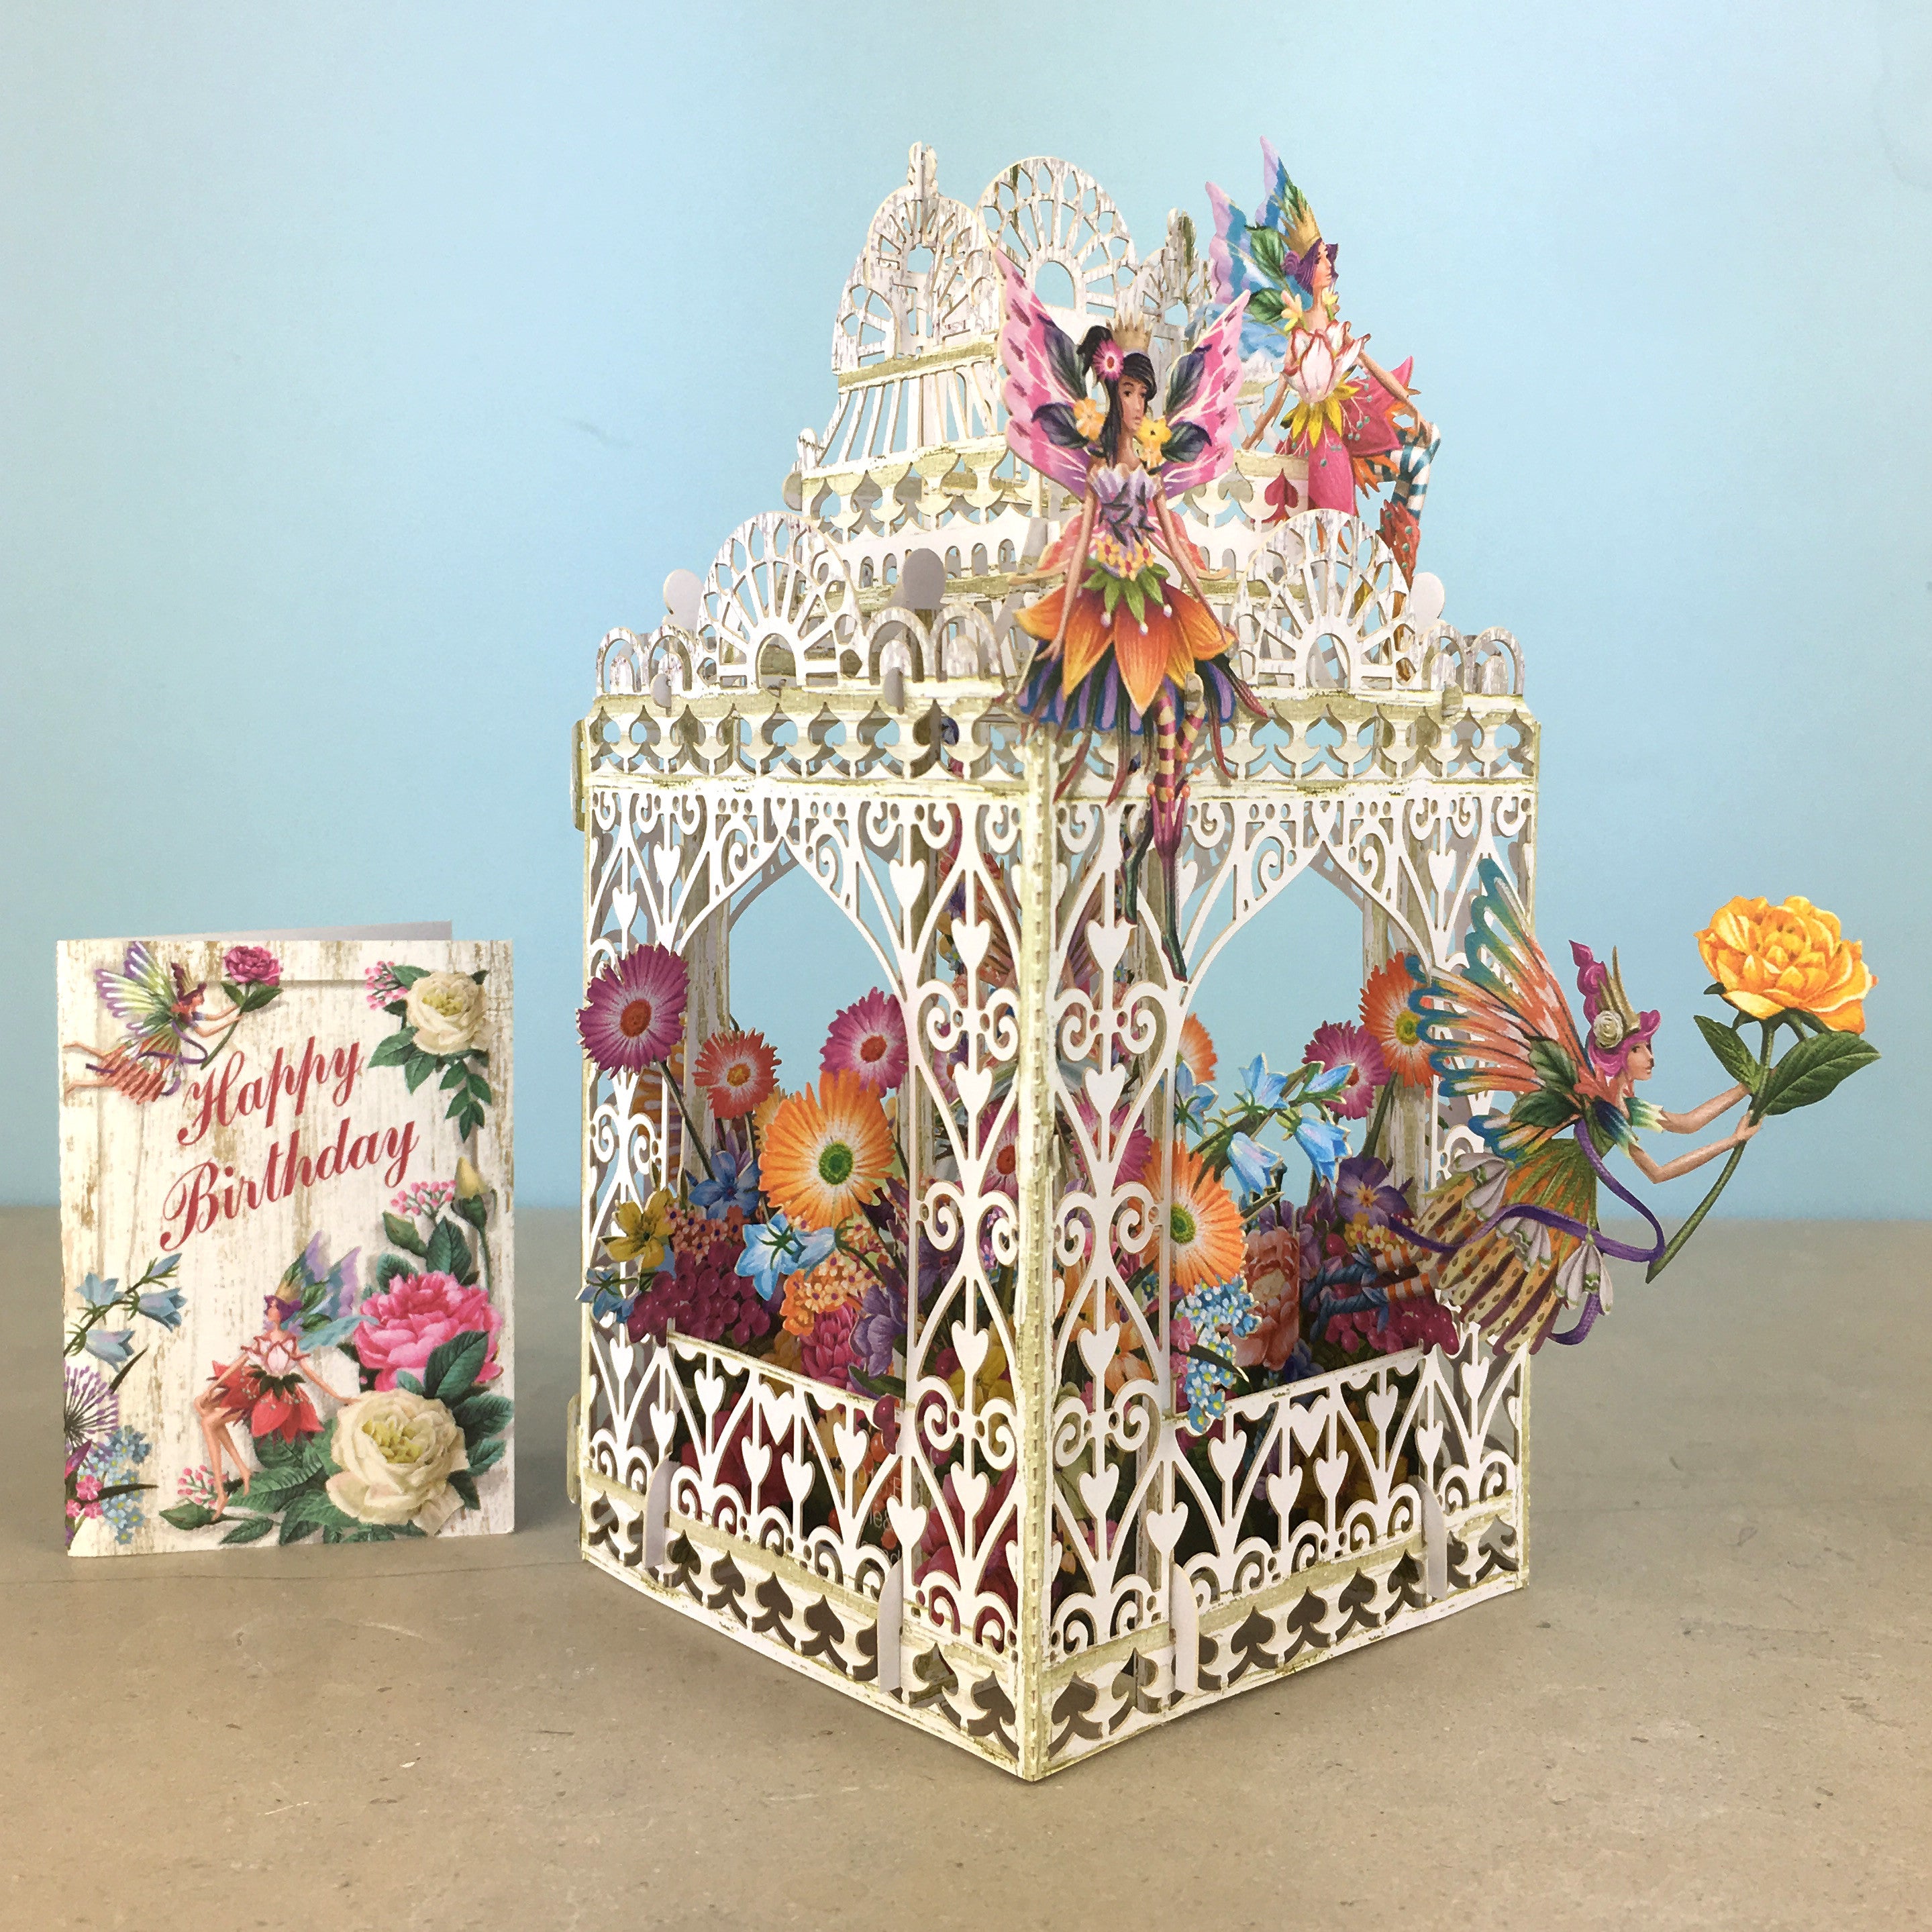 Flower Fairies play amongst flowers in laser cut paper birdcage by Me&amp;McQ